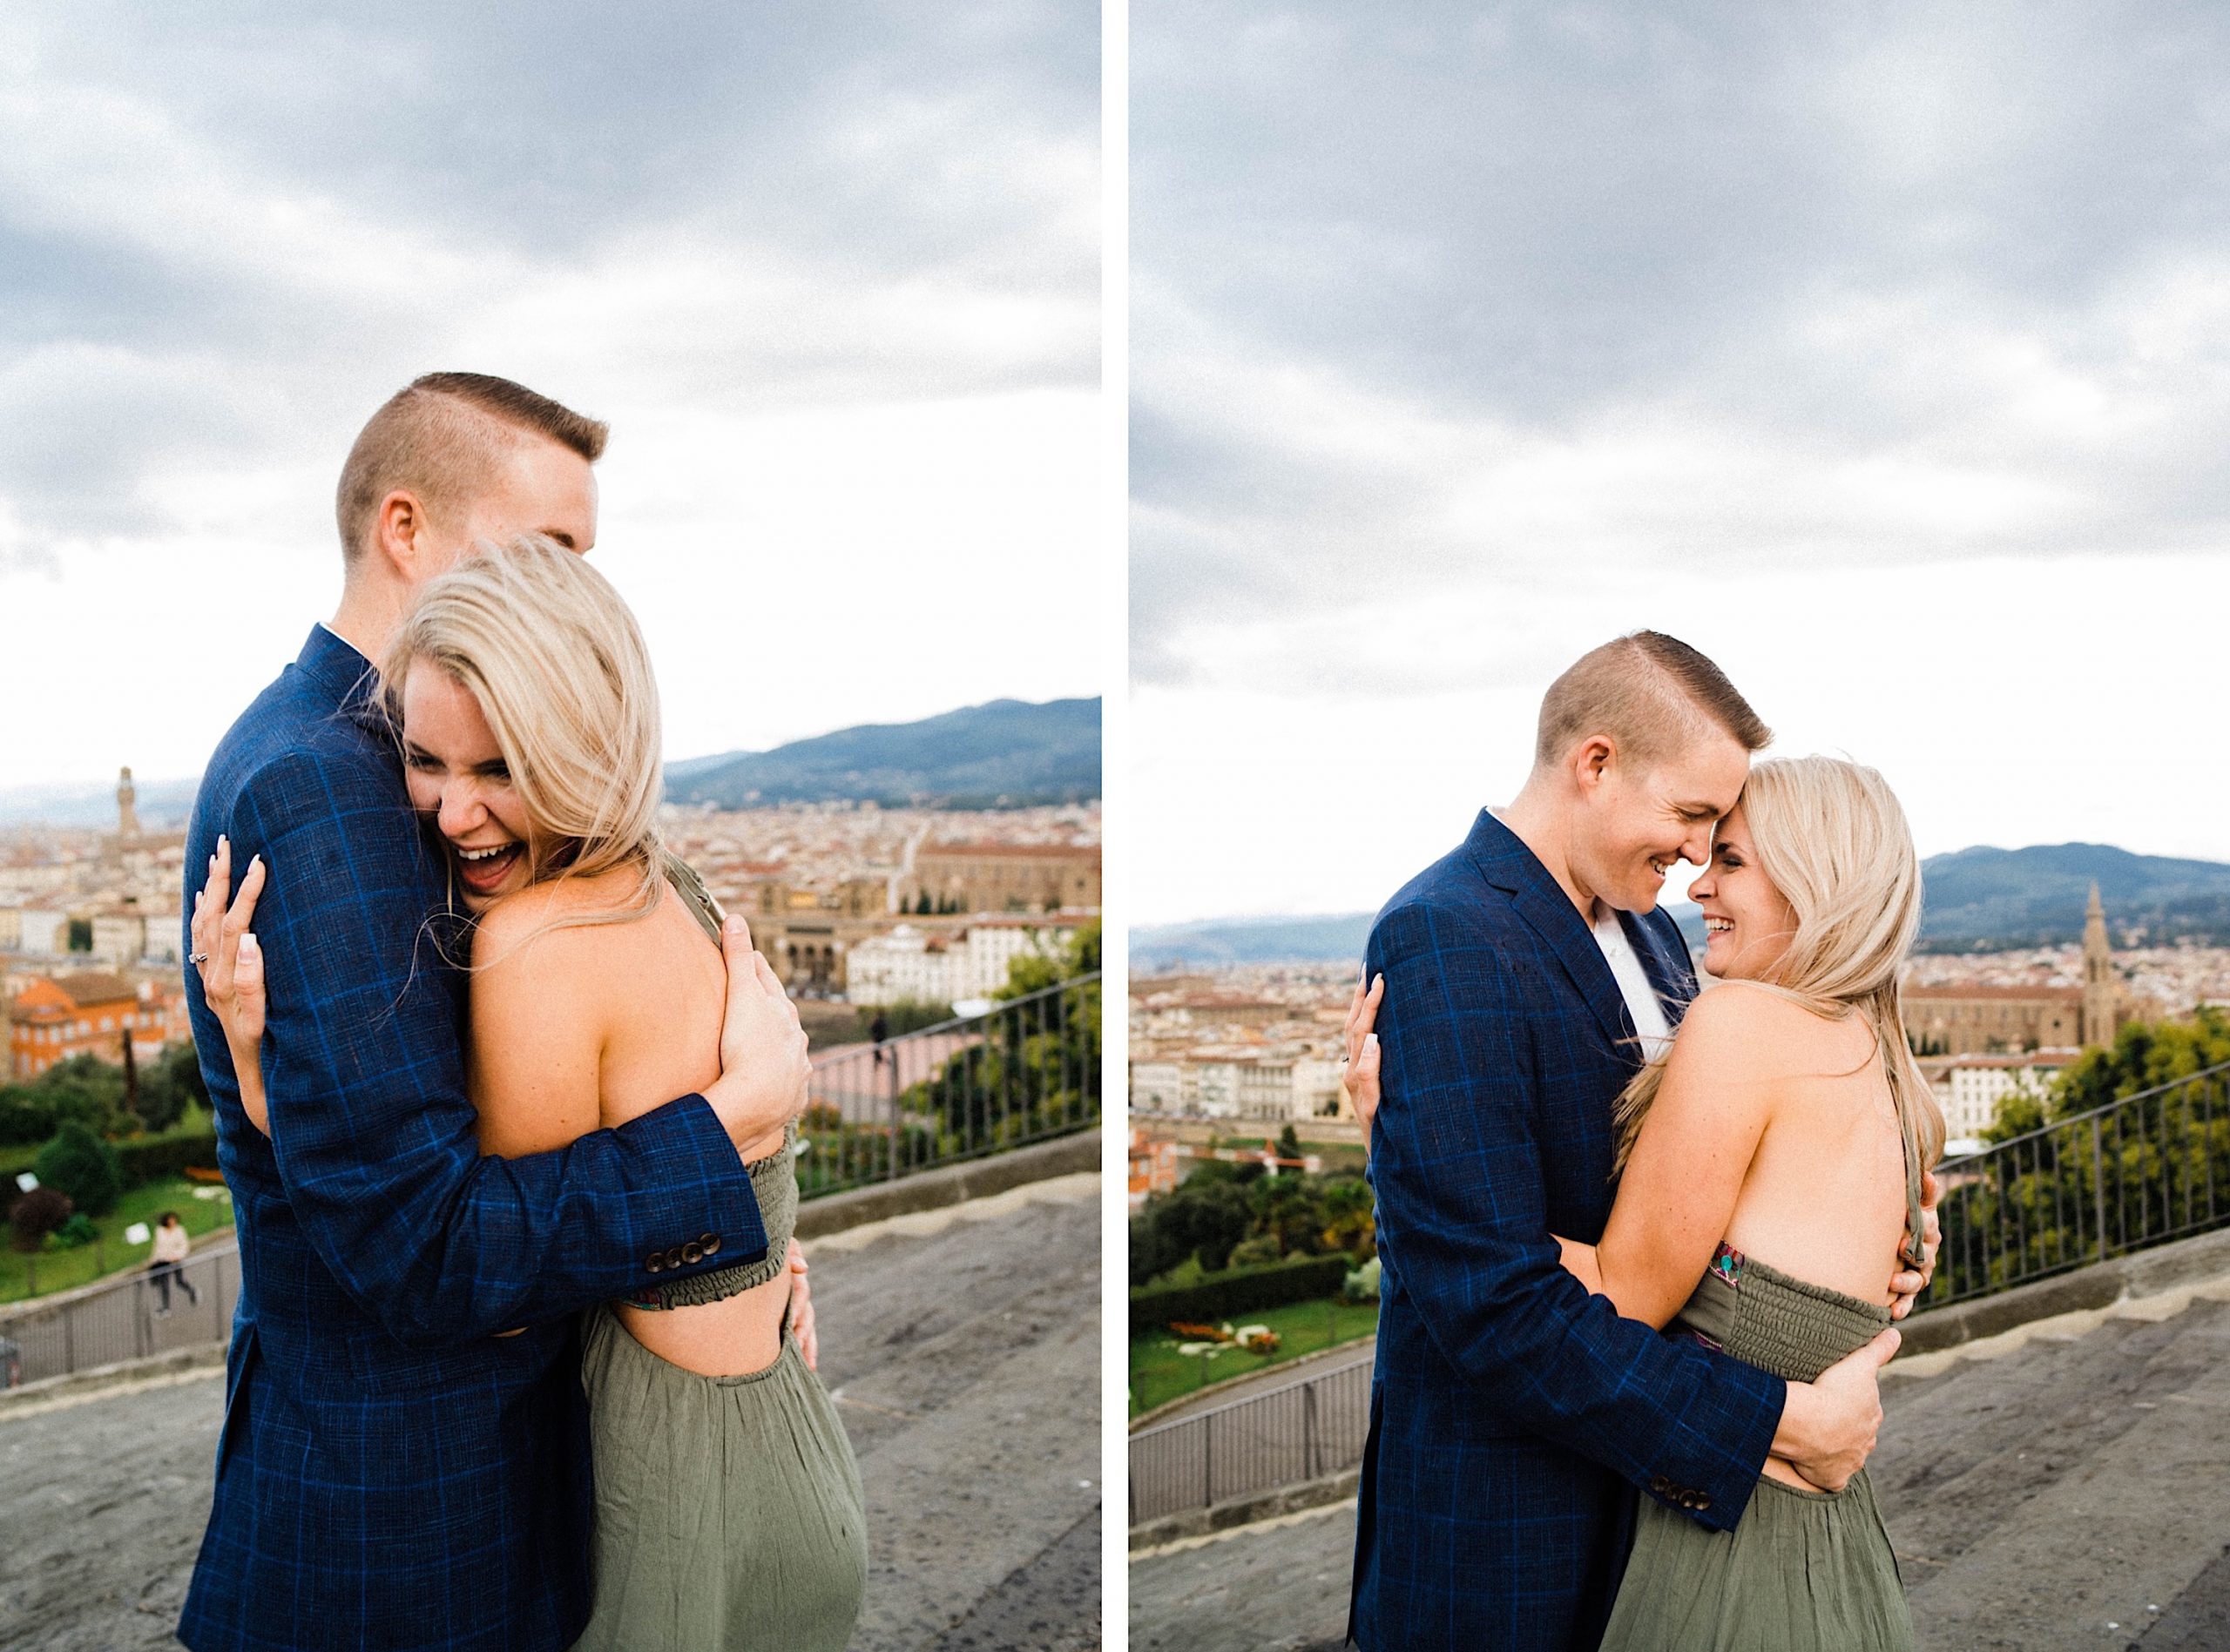 Side by side portraits of a couple standing in the Piazzale Michelangelo in Florence, hugging each other and laughing as rain drops began to fall.